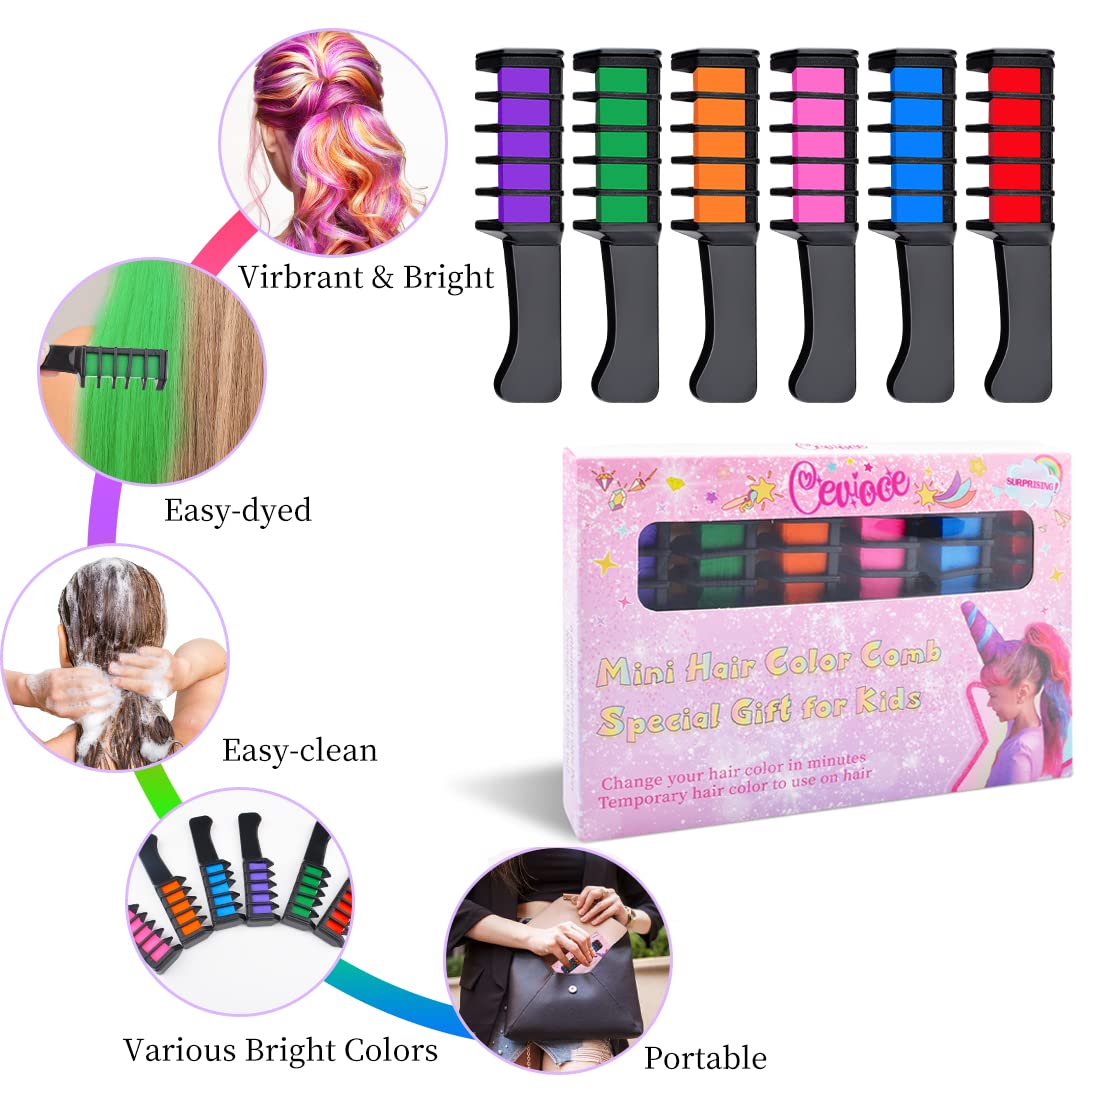 Hair Chalk for Girls,Temporary Hair Color for Kids,Makeup Sets Stocking Stuffers for Kids Teens,Christmas Gifts Toys for Girls,Washable Hair Chalk Comb,Non-toxic Hair Dye,Color Hair Spray - image 5 of 5